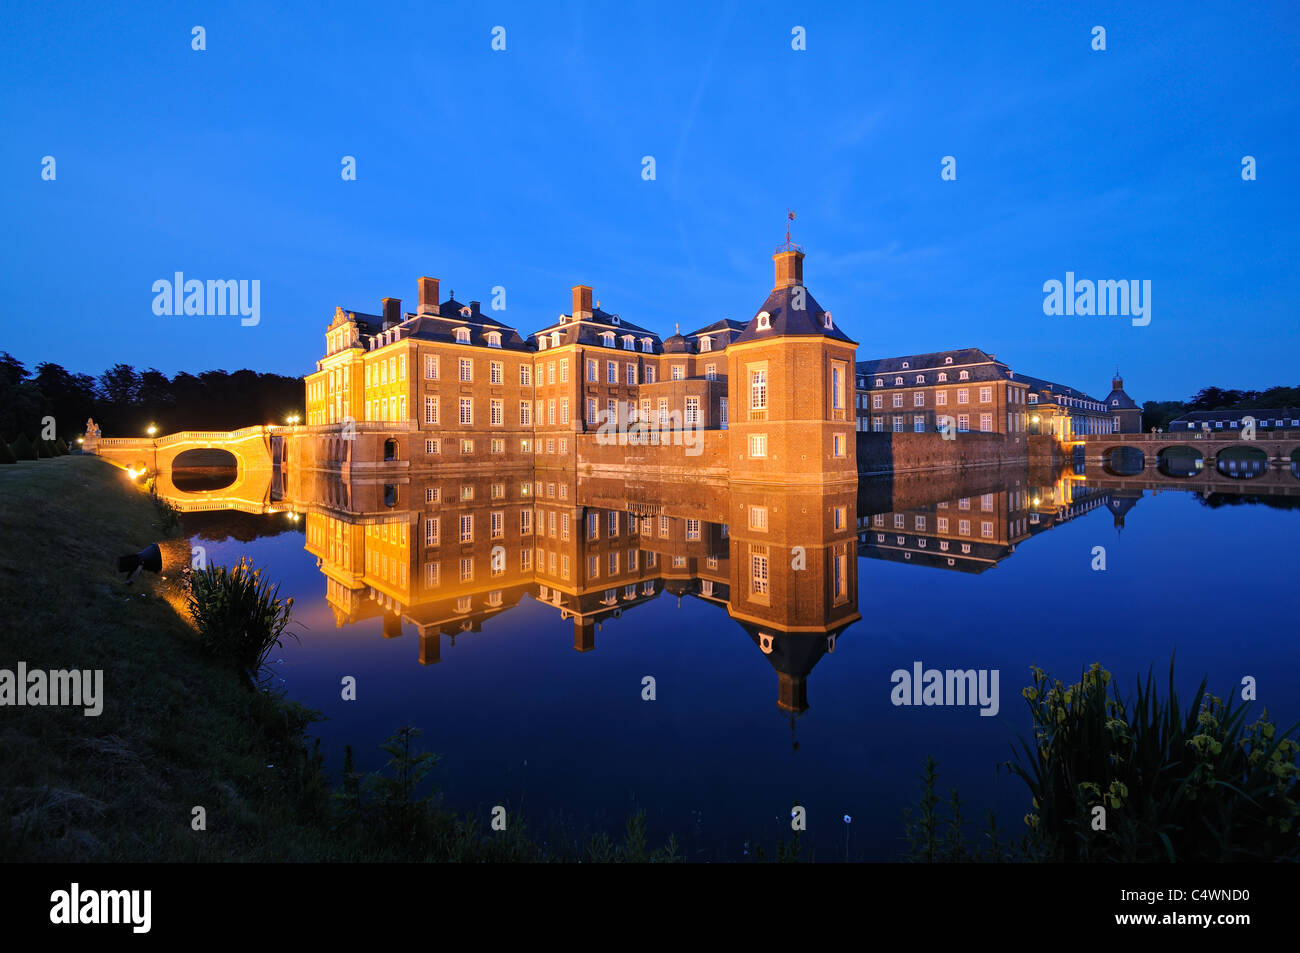 Night shot of a grand water castle in Nordkirchen, Westphalia, Germany. Stock Photo